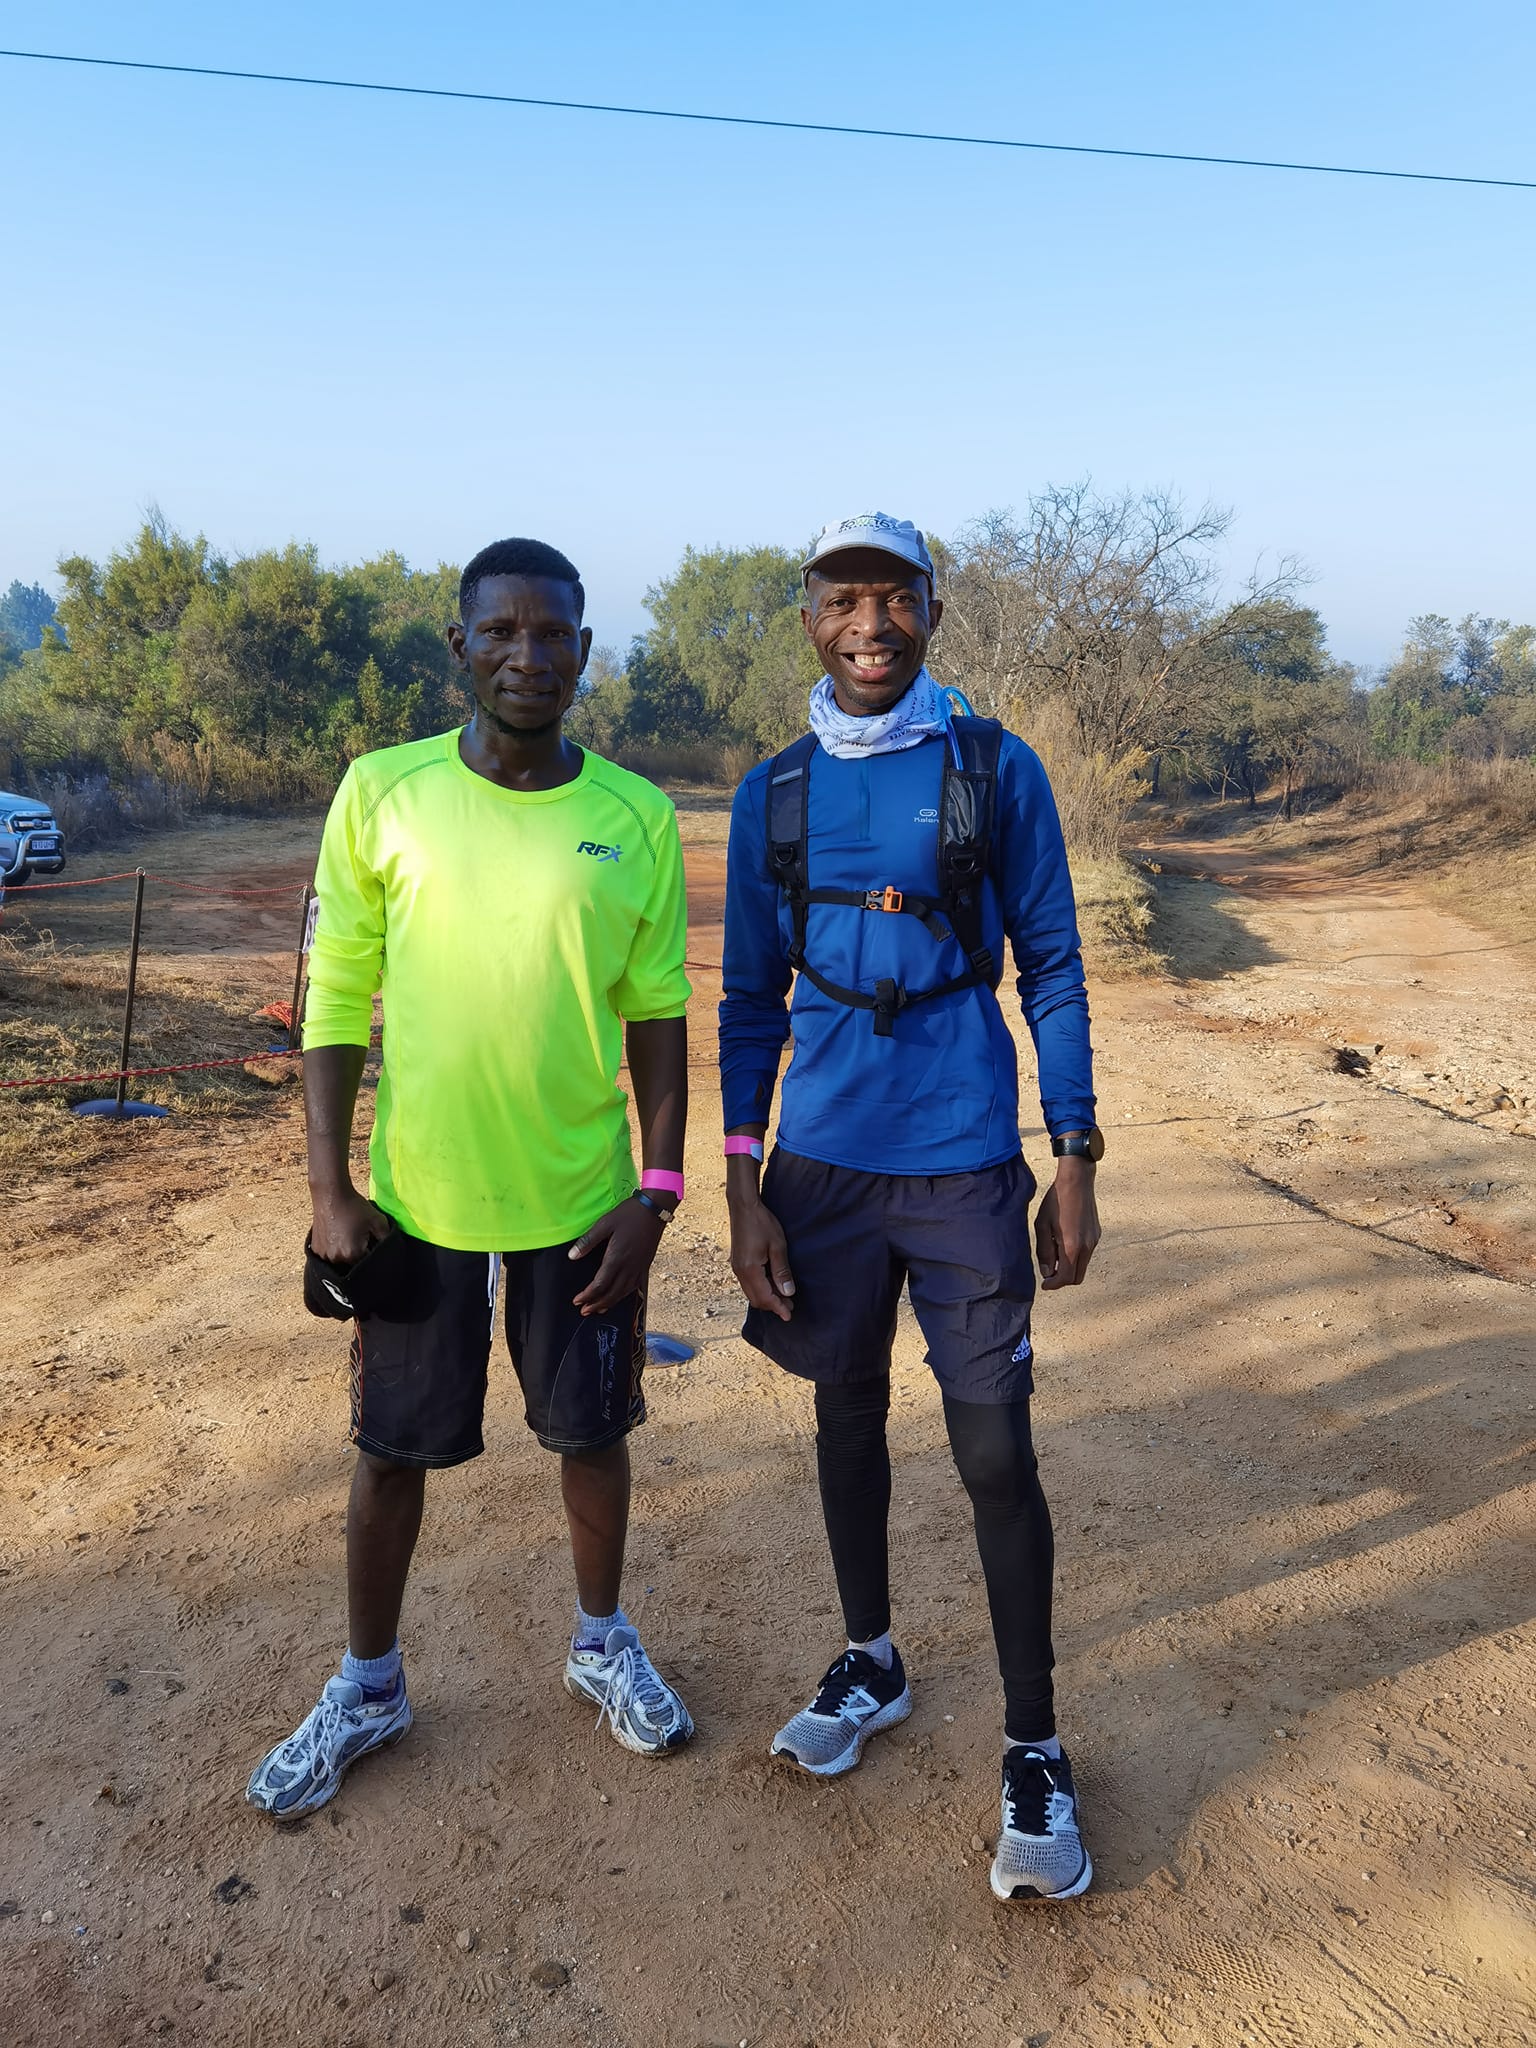 Our 1st two 12km finishers in the 2022 Run